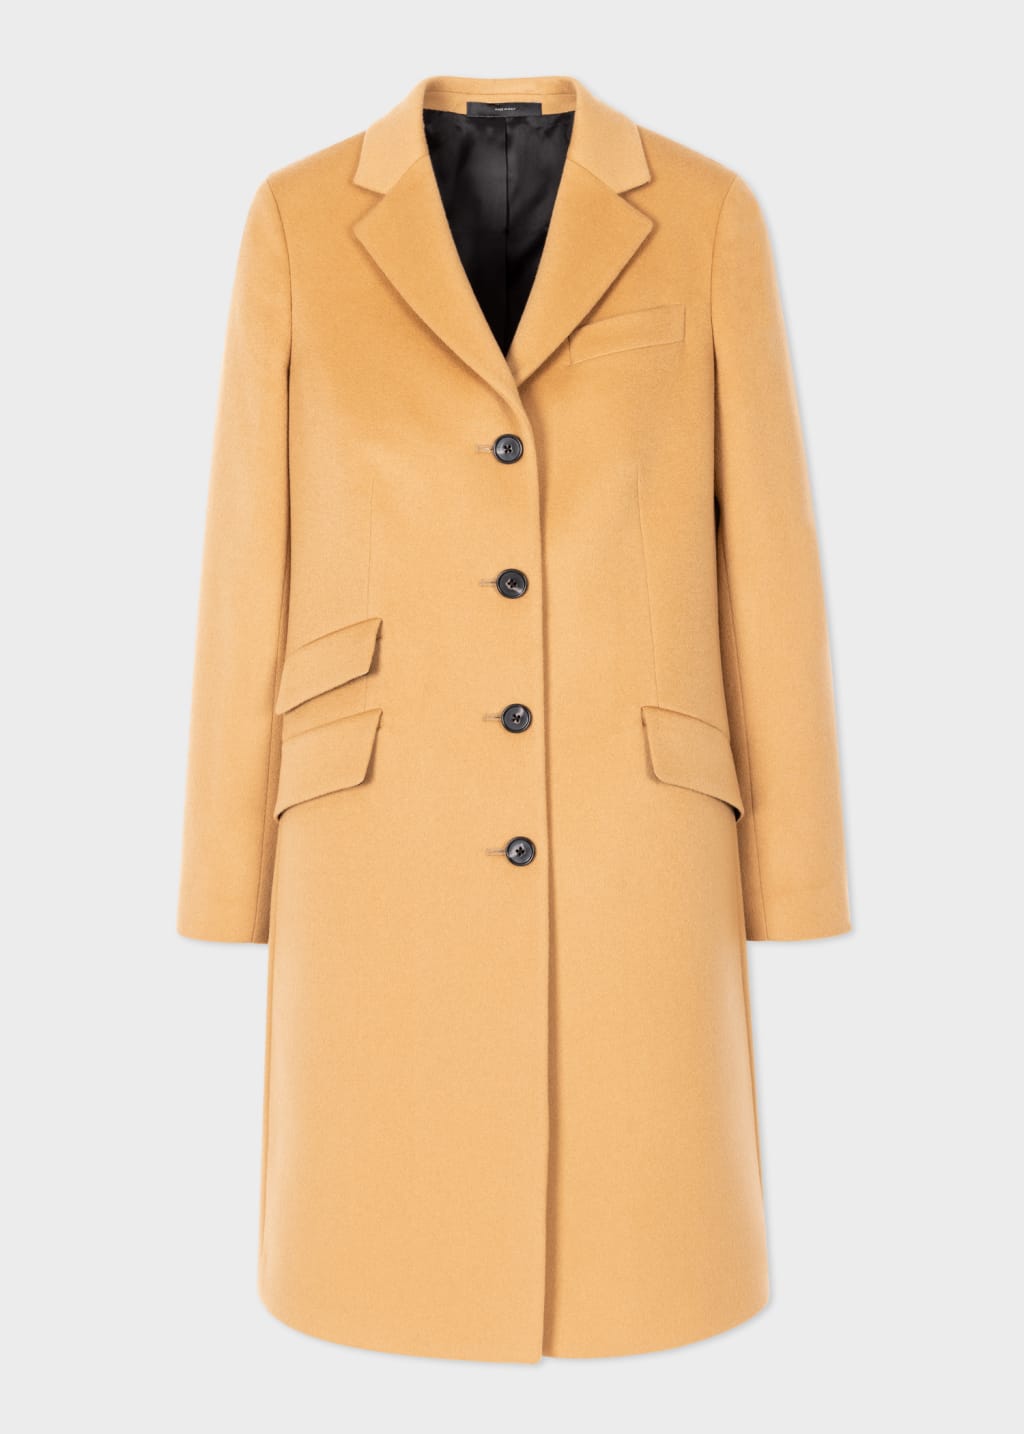 Product View - Women's Camel Wool-Cashmere Epsom Coat by Paul Smith